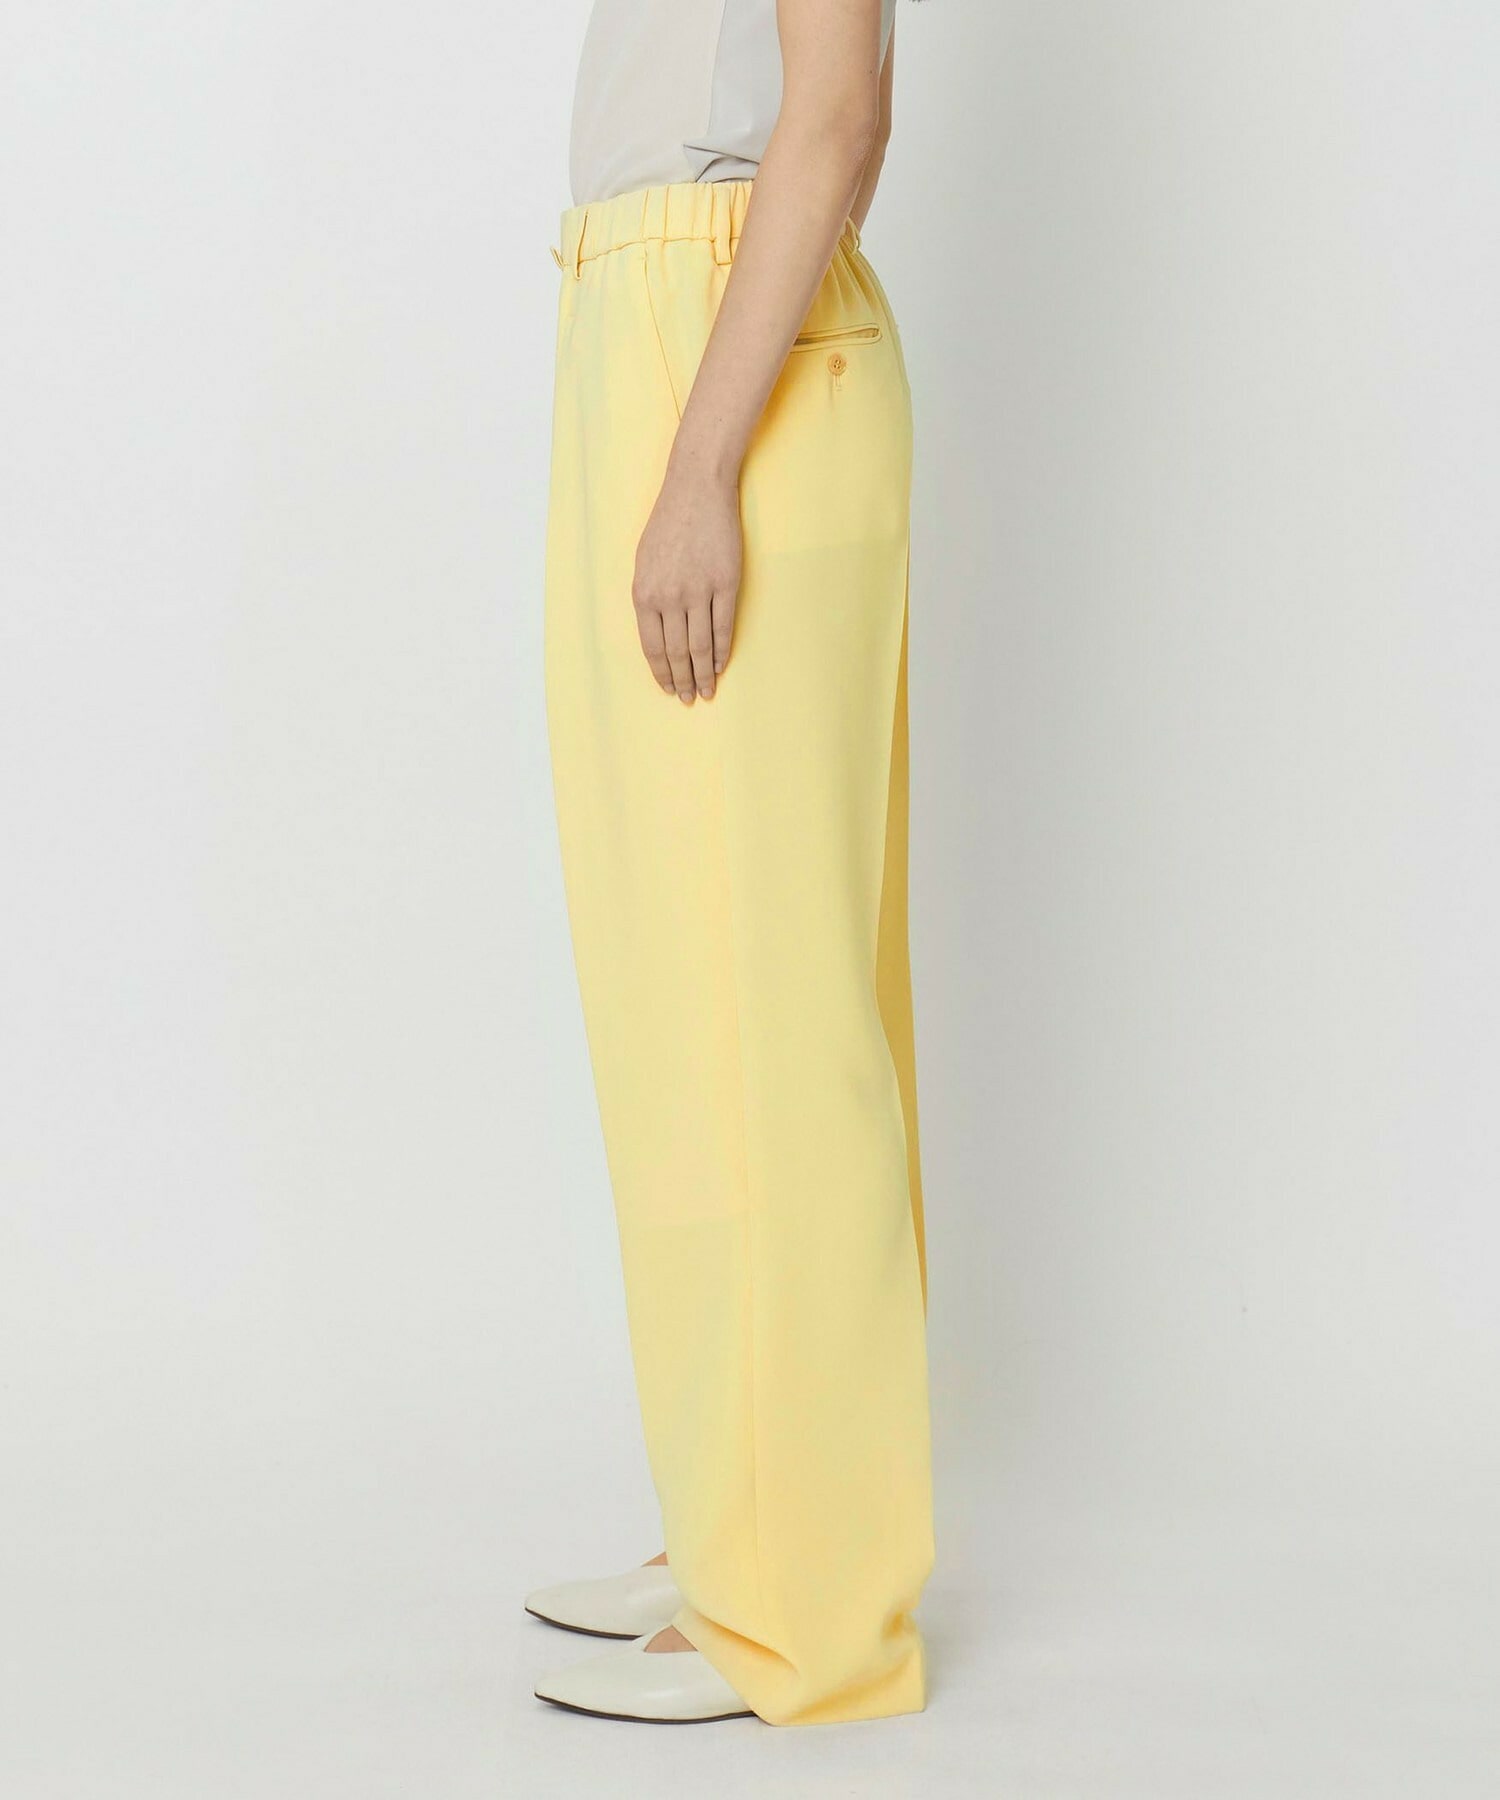 【yoshie inaba】LIGHT DOUBLE CLOTH MODERN TROUSERS W/GATHER BELT 詳細画像 ブラック 3